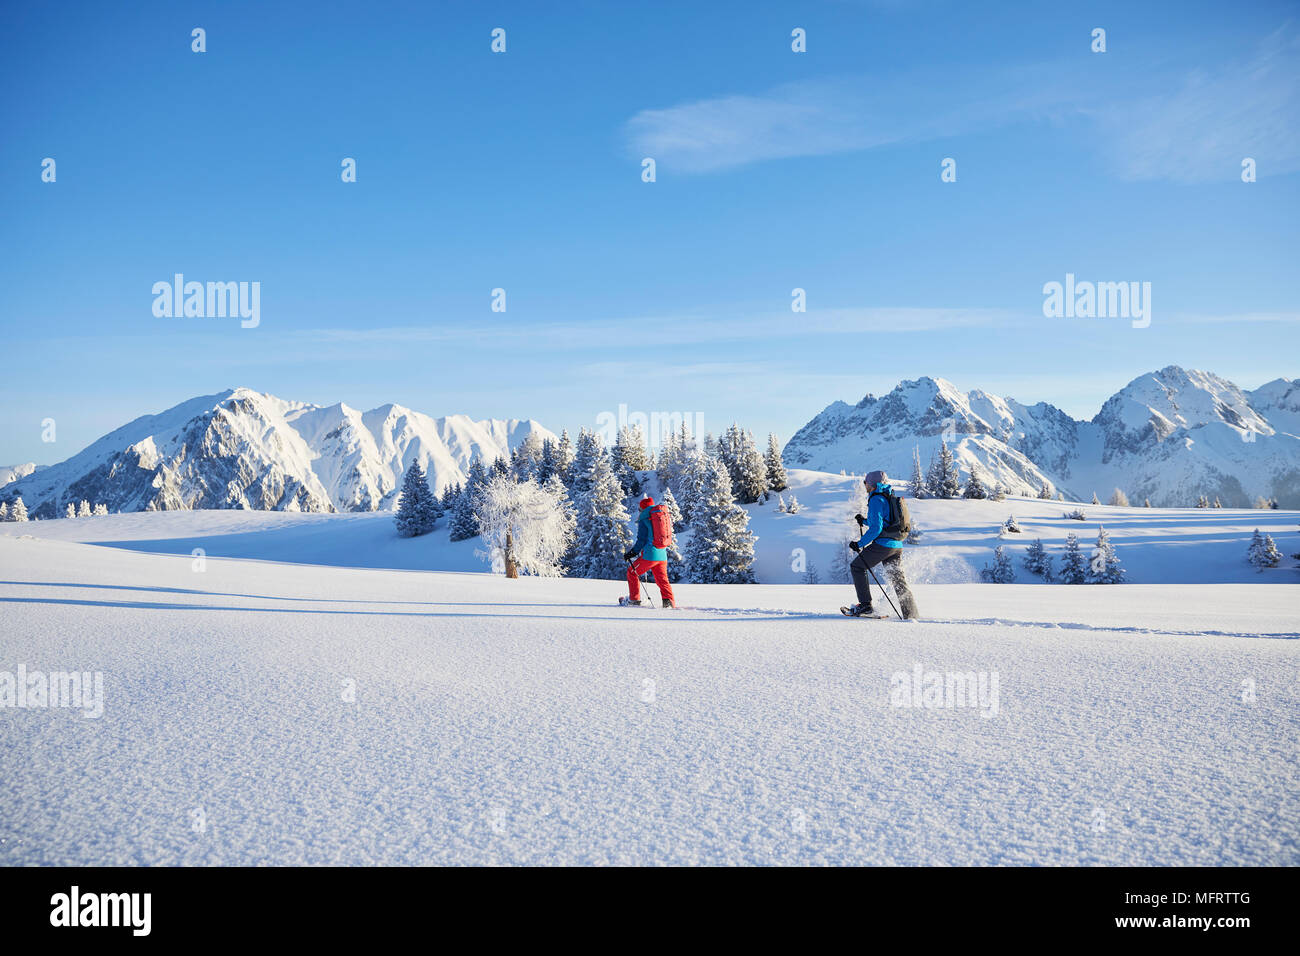 Snowshoeing, hiking in winter landscape, Simmering Alm, Obsteig, Mieming, Tyrol, Austria Stock Photo